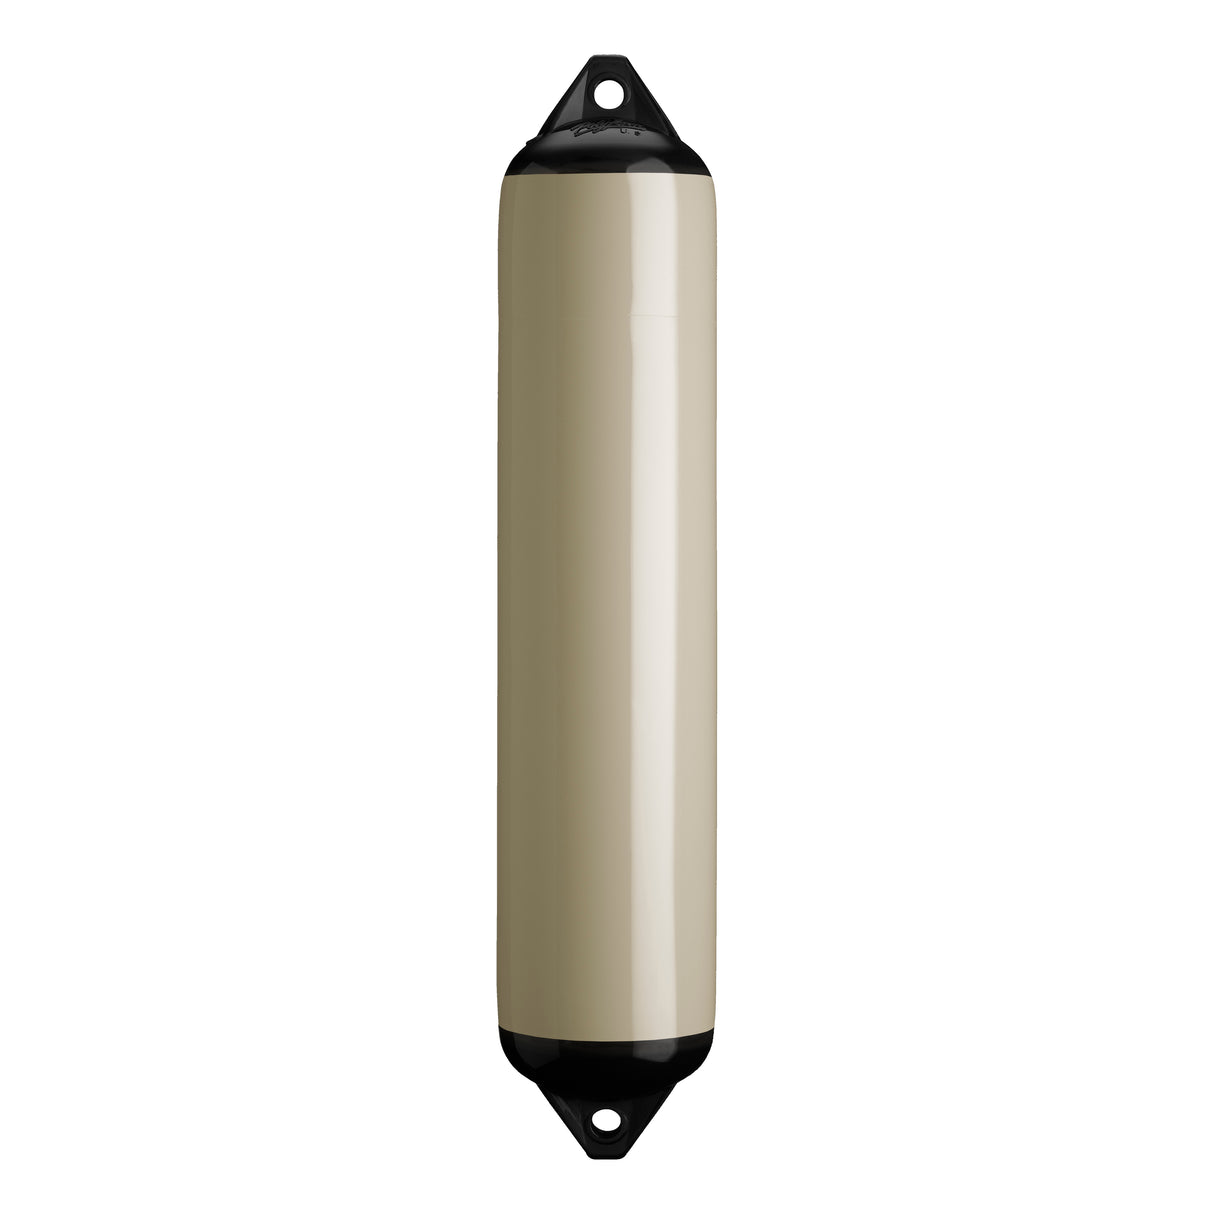 Sand boat fender with Black-Top, Polyform F-4